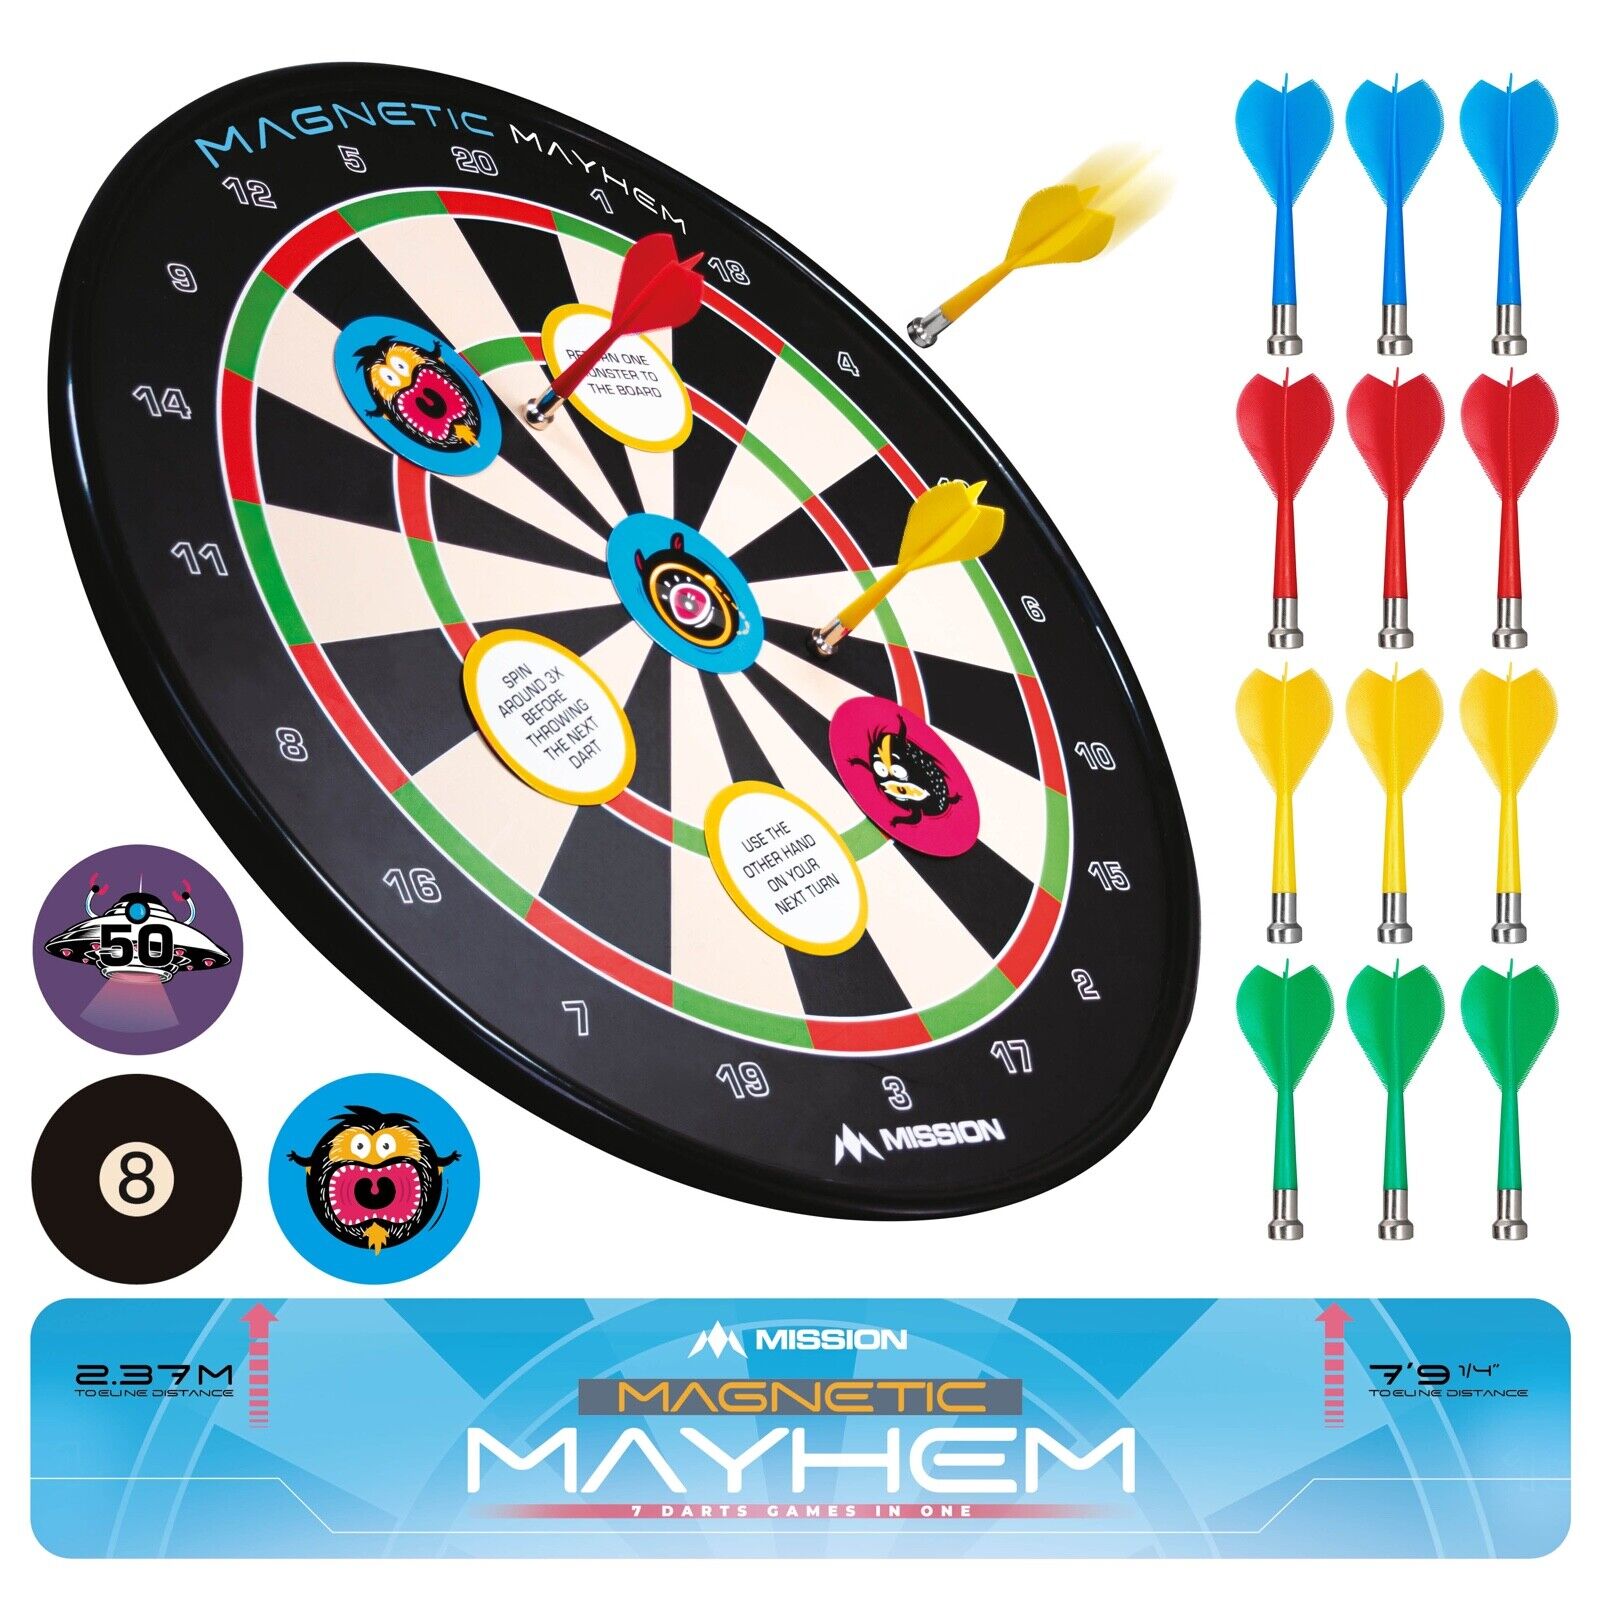 Scolia Home Automatic Darts Scoring System + Spark Light : :  Sports & Outdoors